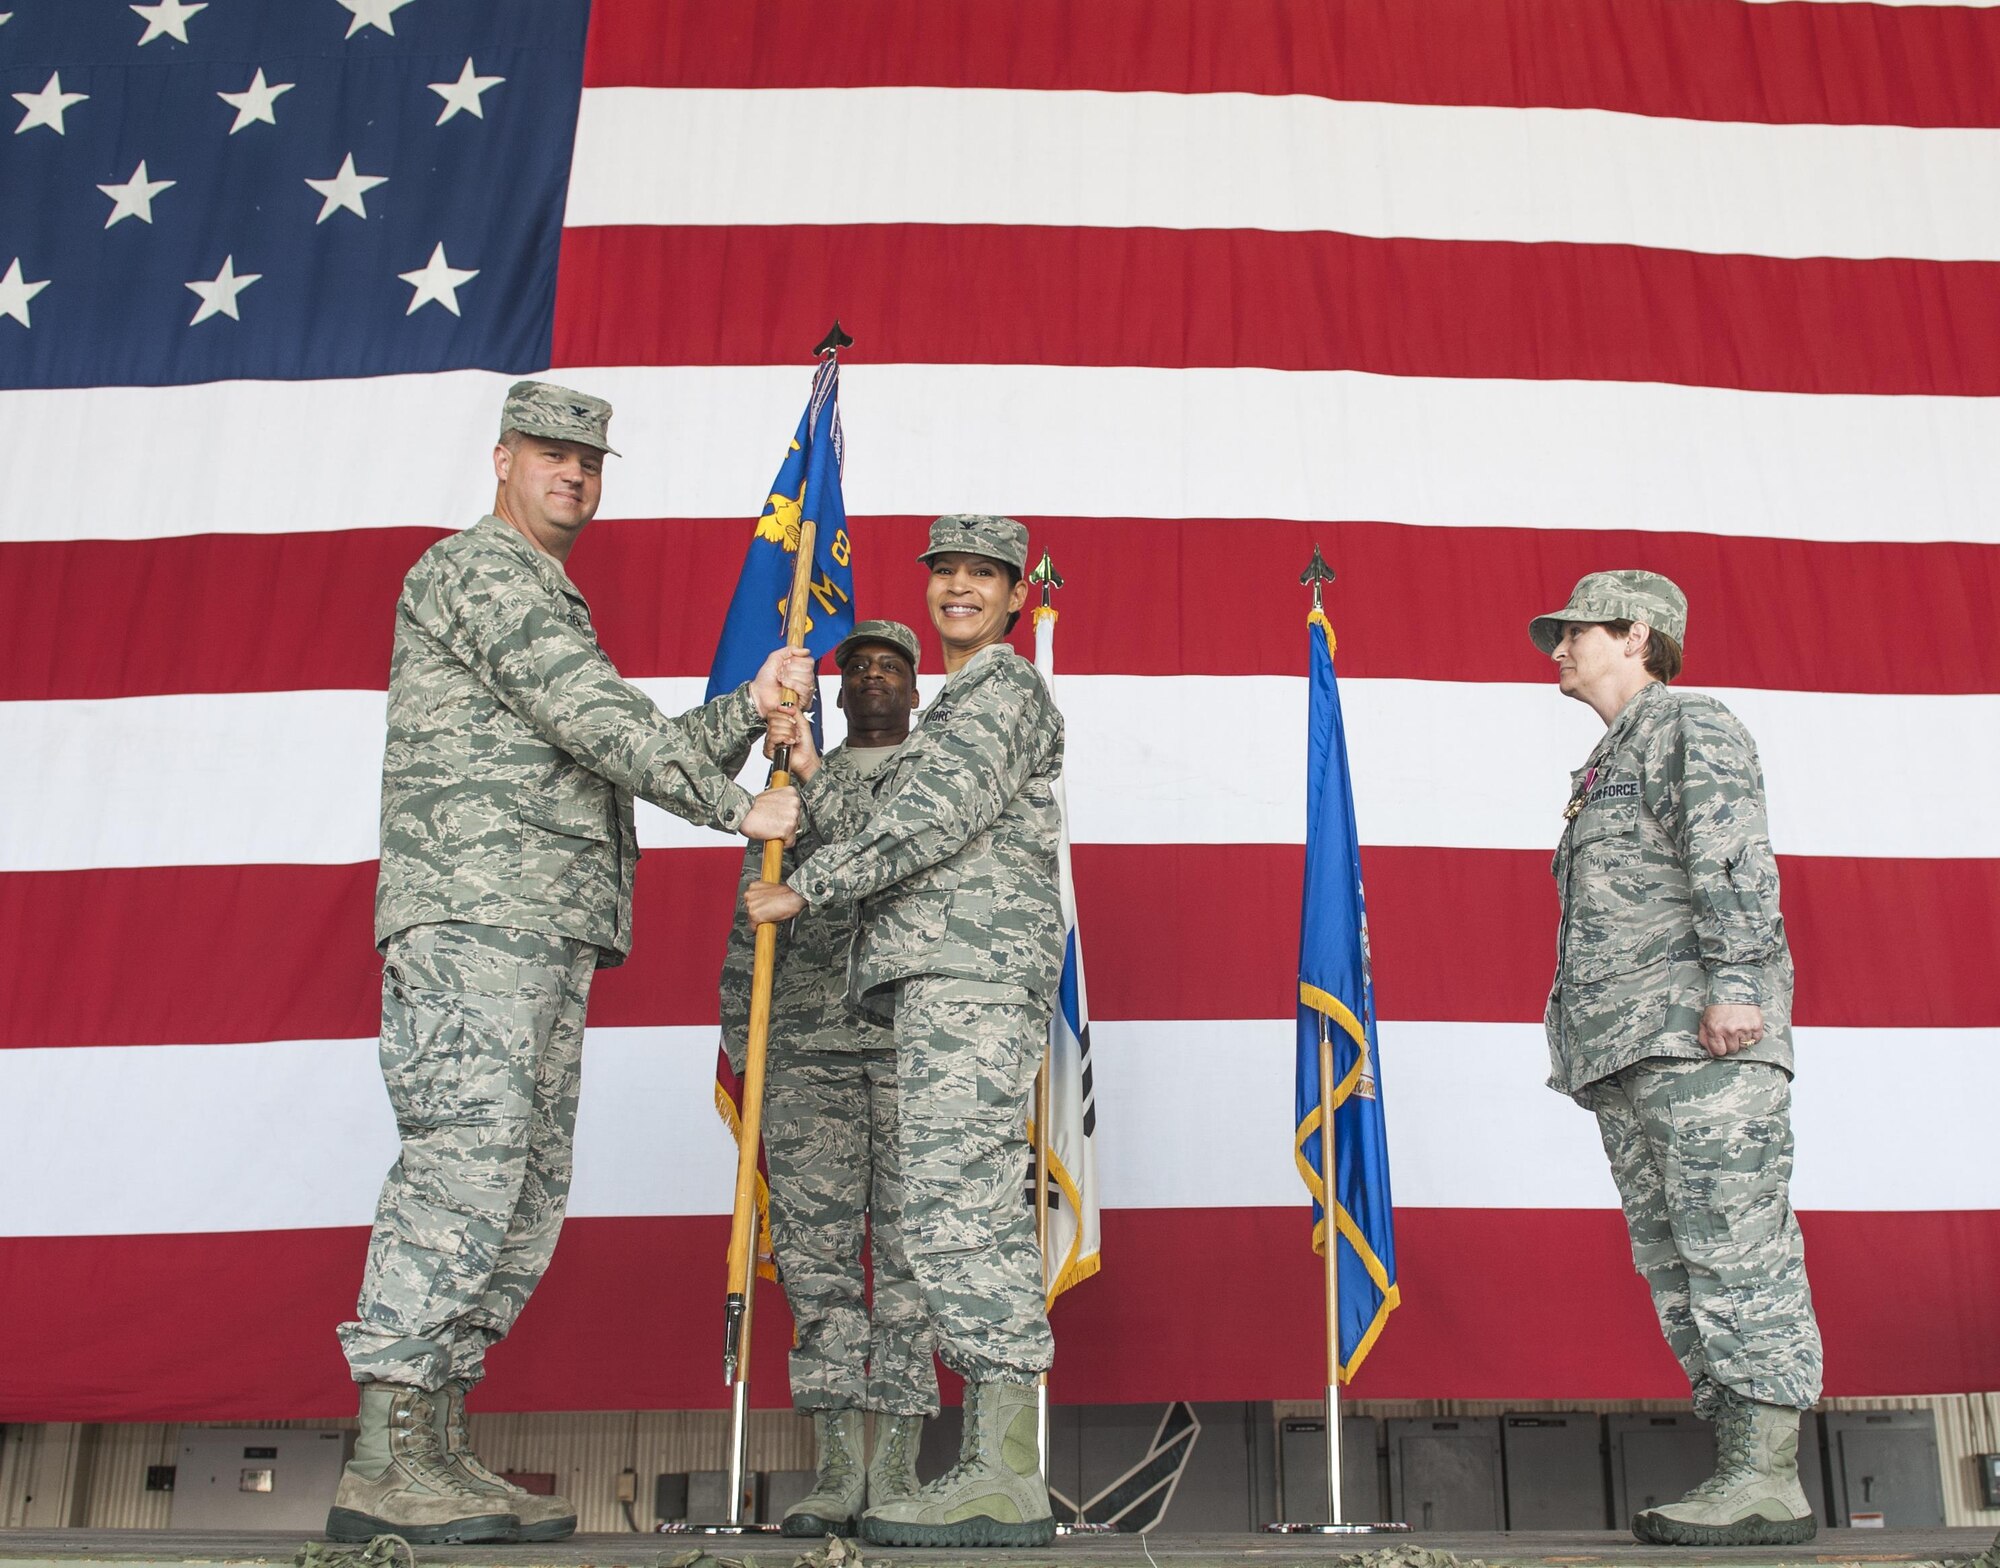 Col. Joann V. Palmer, 8th Medical Group commander, receives the guidon from Col. David Shoemaker, 8th Fighter Wing commander, during a change of command ceremony at Kunsan Air Base, Republic of Korea, June 23, 2017. Shoemaker presided over the ceremony in which Col. Lisa A. Davison relinquished command of the 8th MDG to Palmer. (U.S. Air Force photo by Senior Airman Colville McFee/Released)